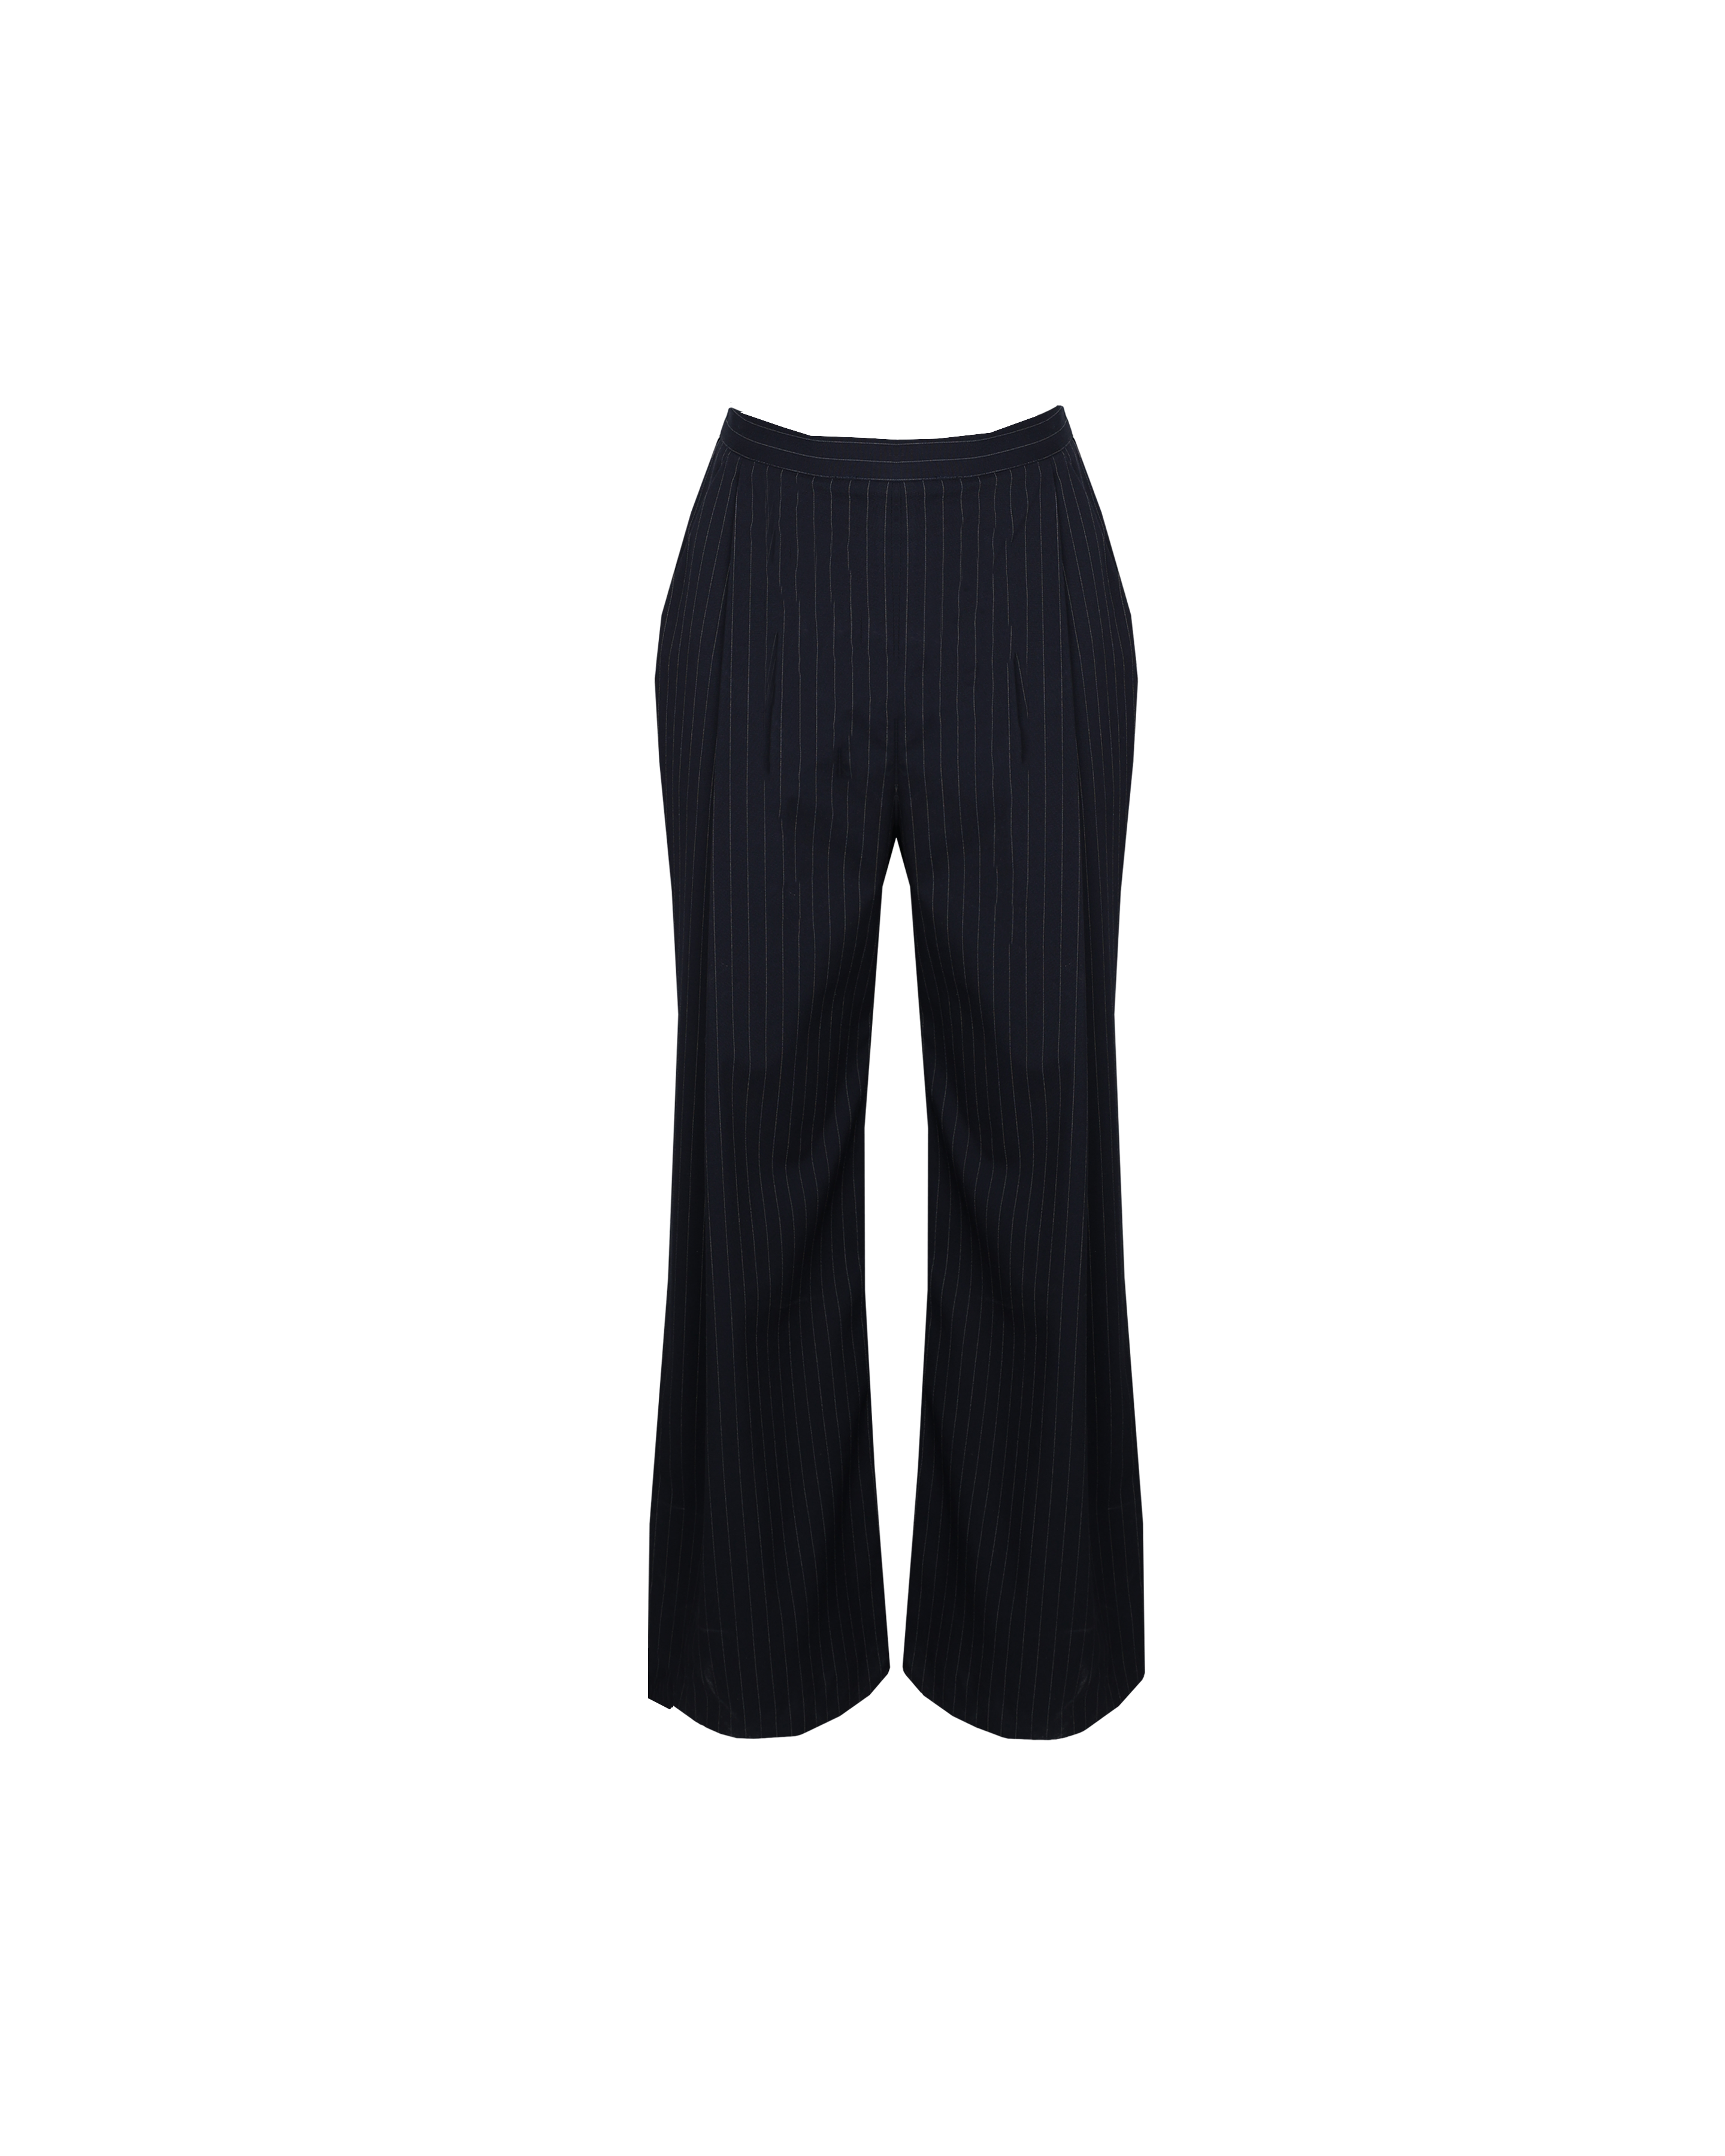 COLLUSION pinstripe straight leg tailored trousers co-ord with V waistband  detail in navy | ASOS